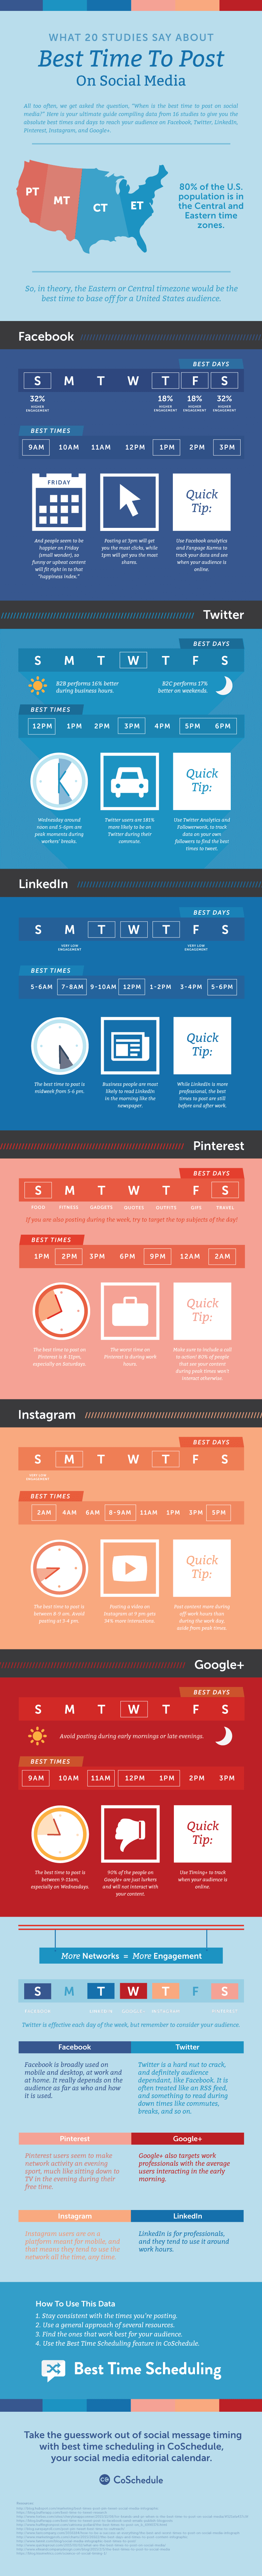 infographic on the best time to post on instagram, facebook, twitter, pinterest, and google+